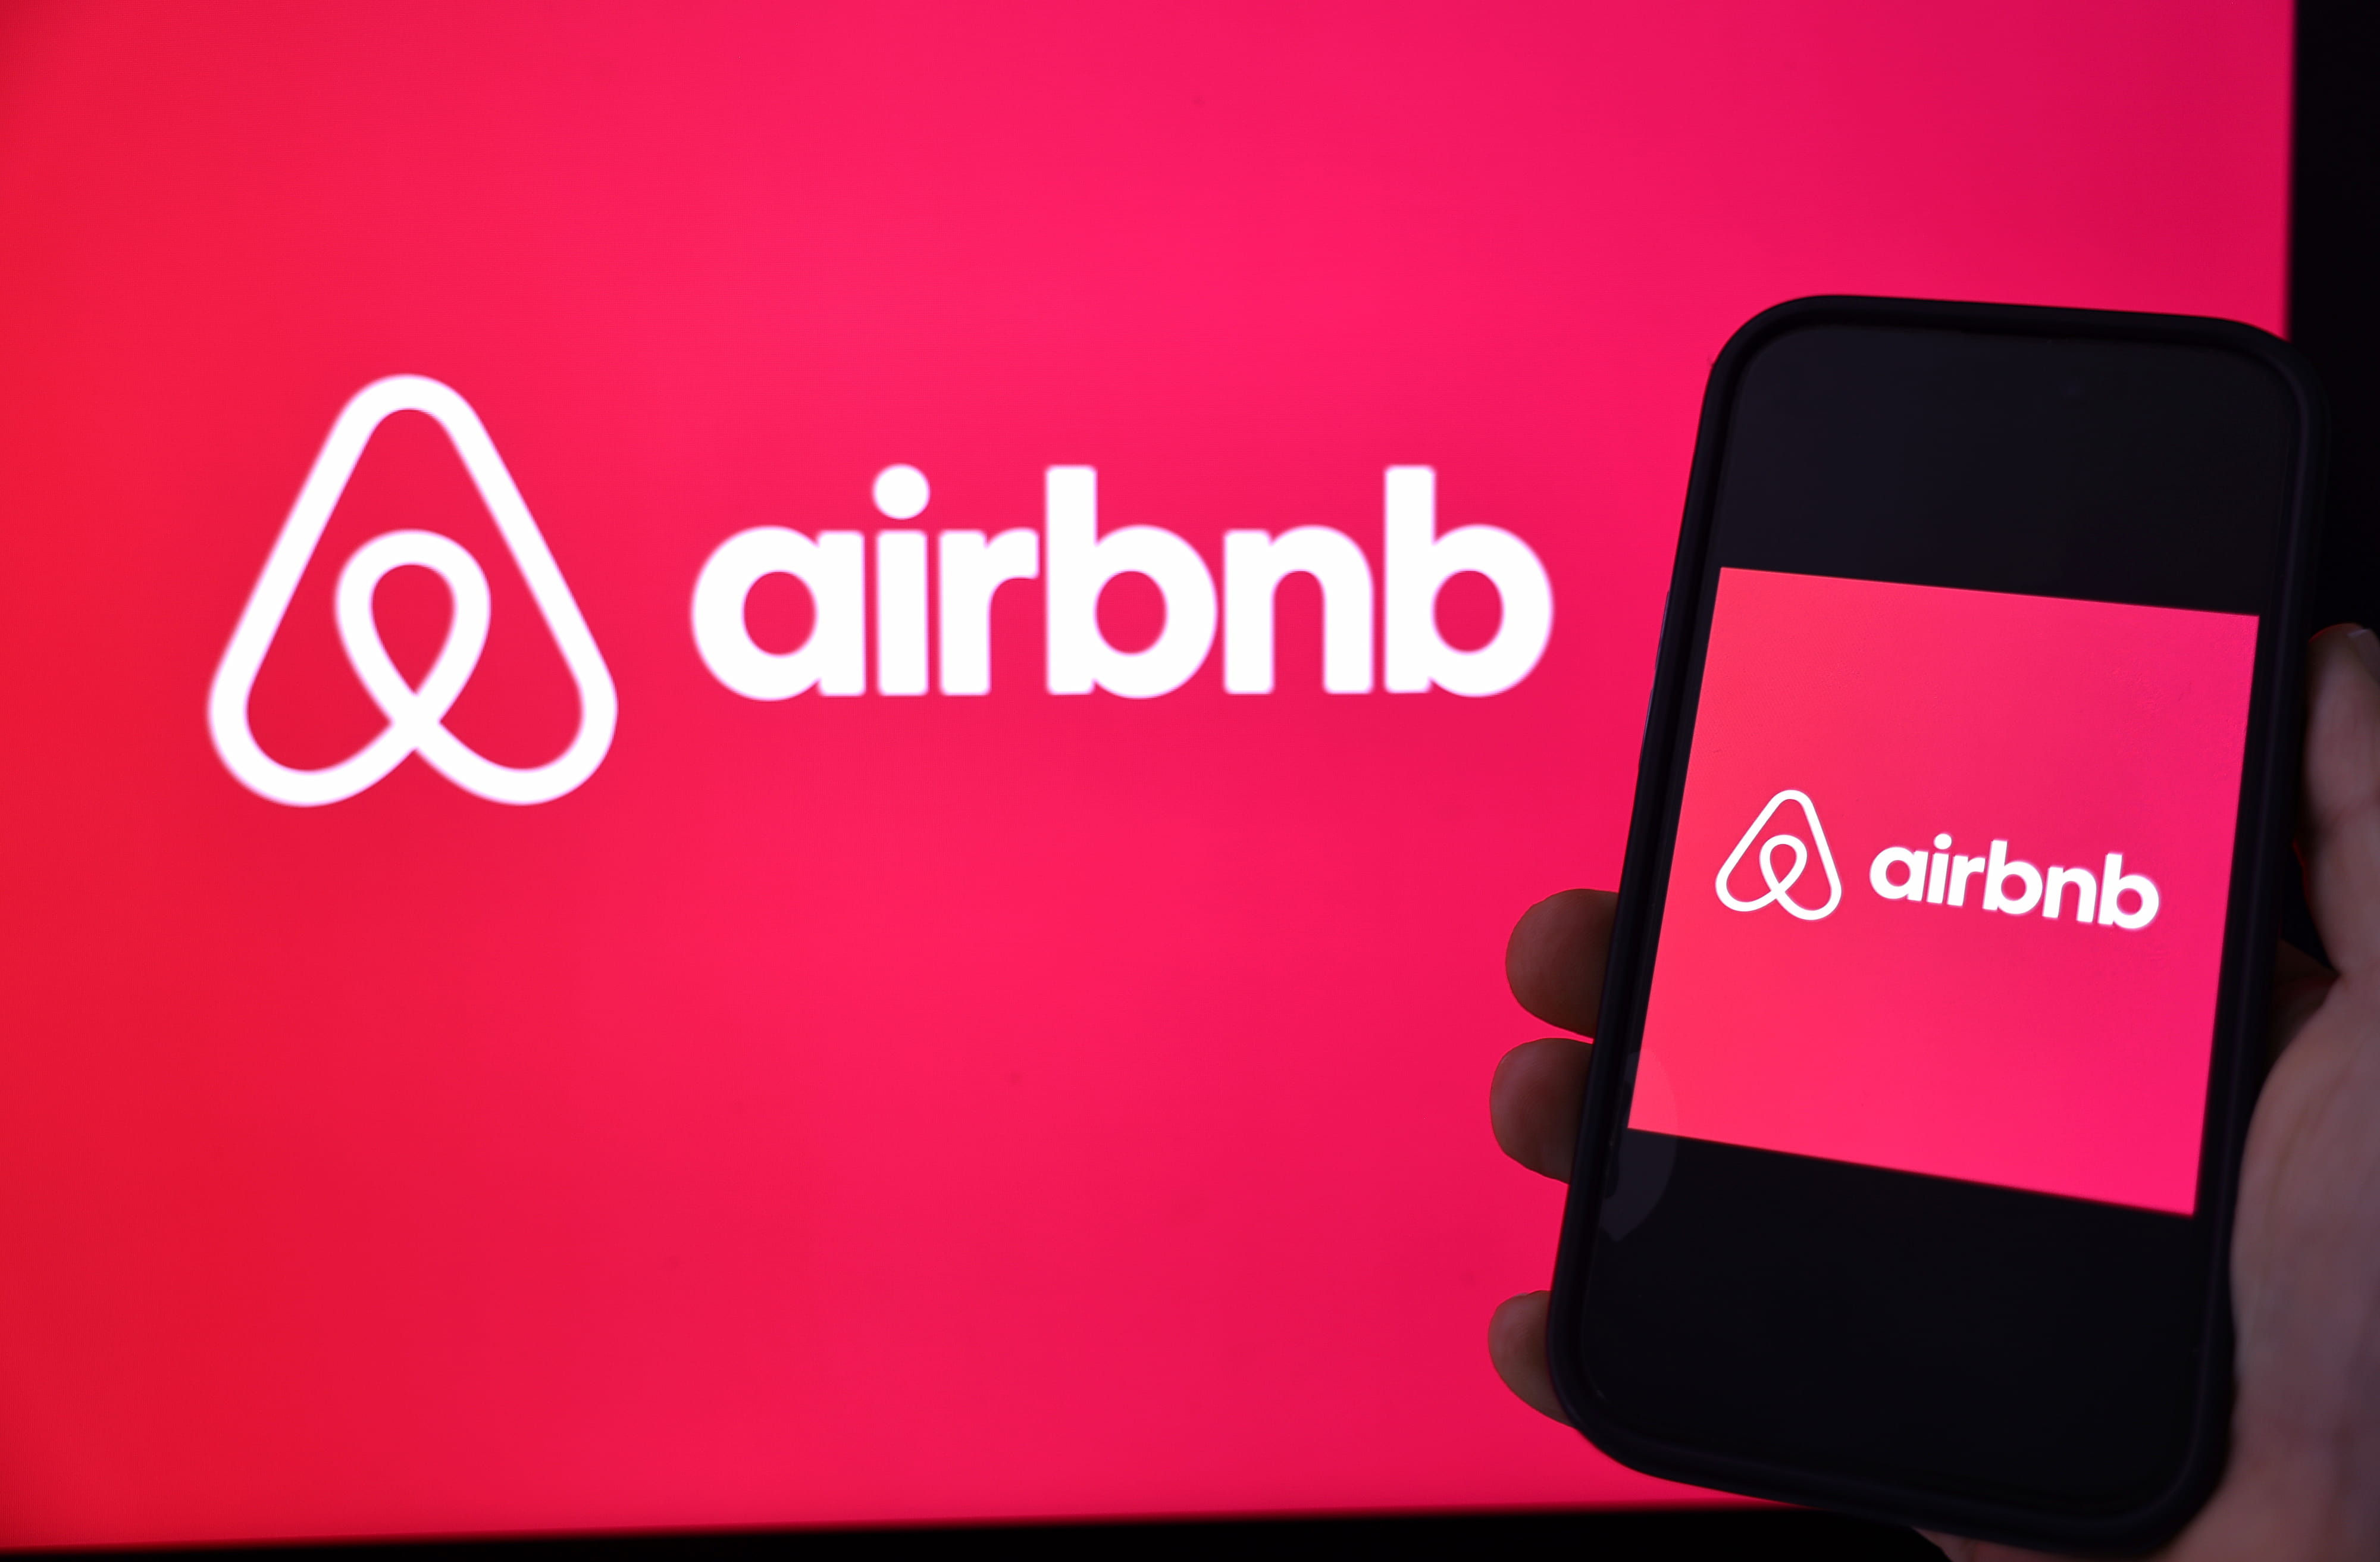 Airbnb Banning Indoor Security Cameras in Listings